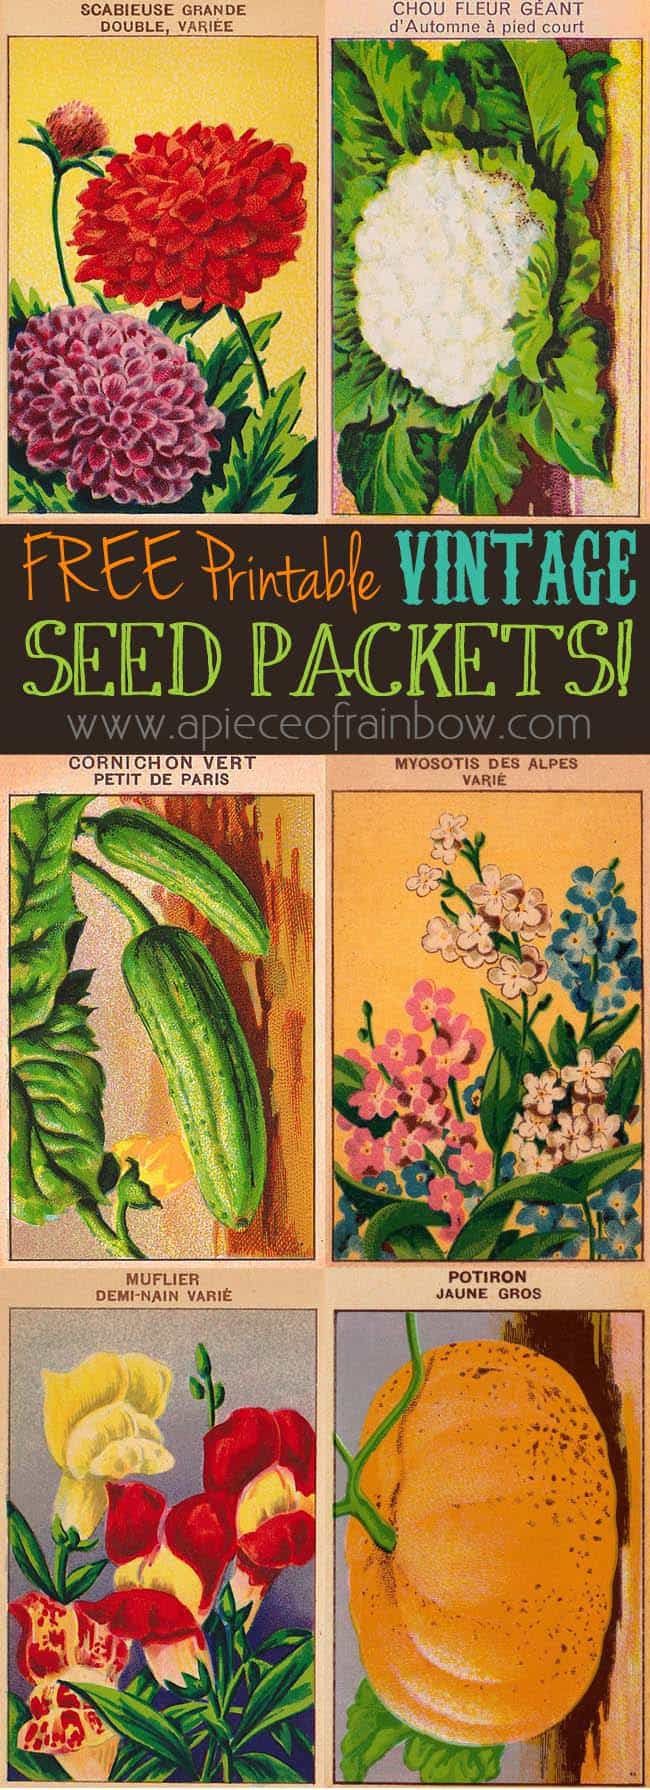 vintage-seed-packet-wall-art-apieceofrainbow